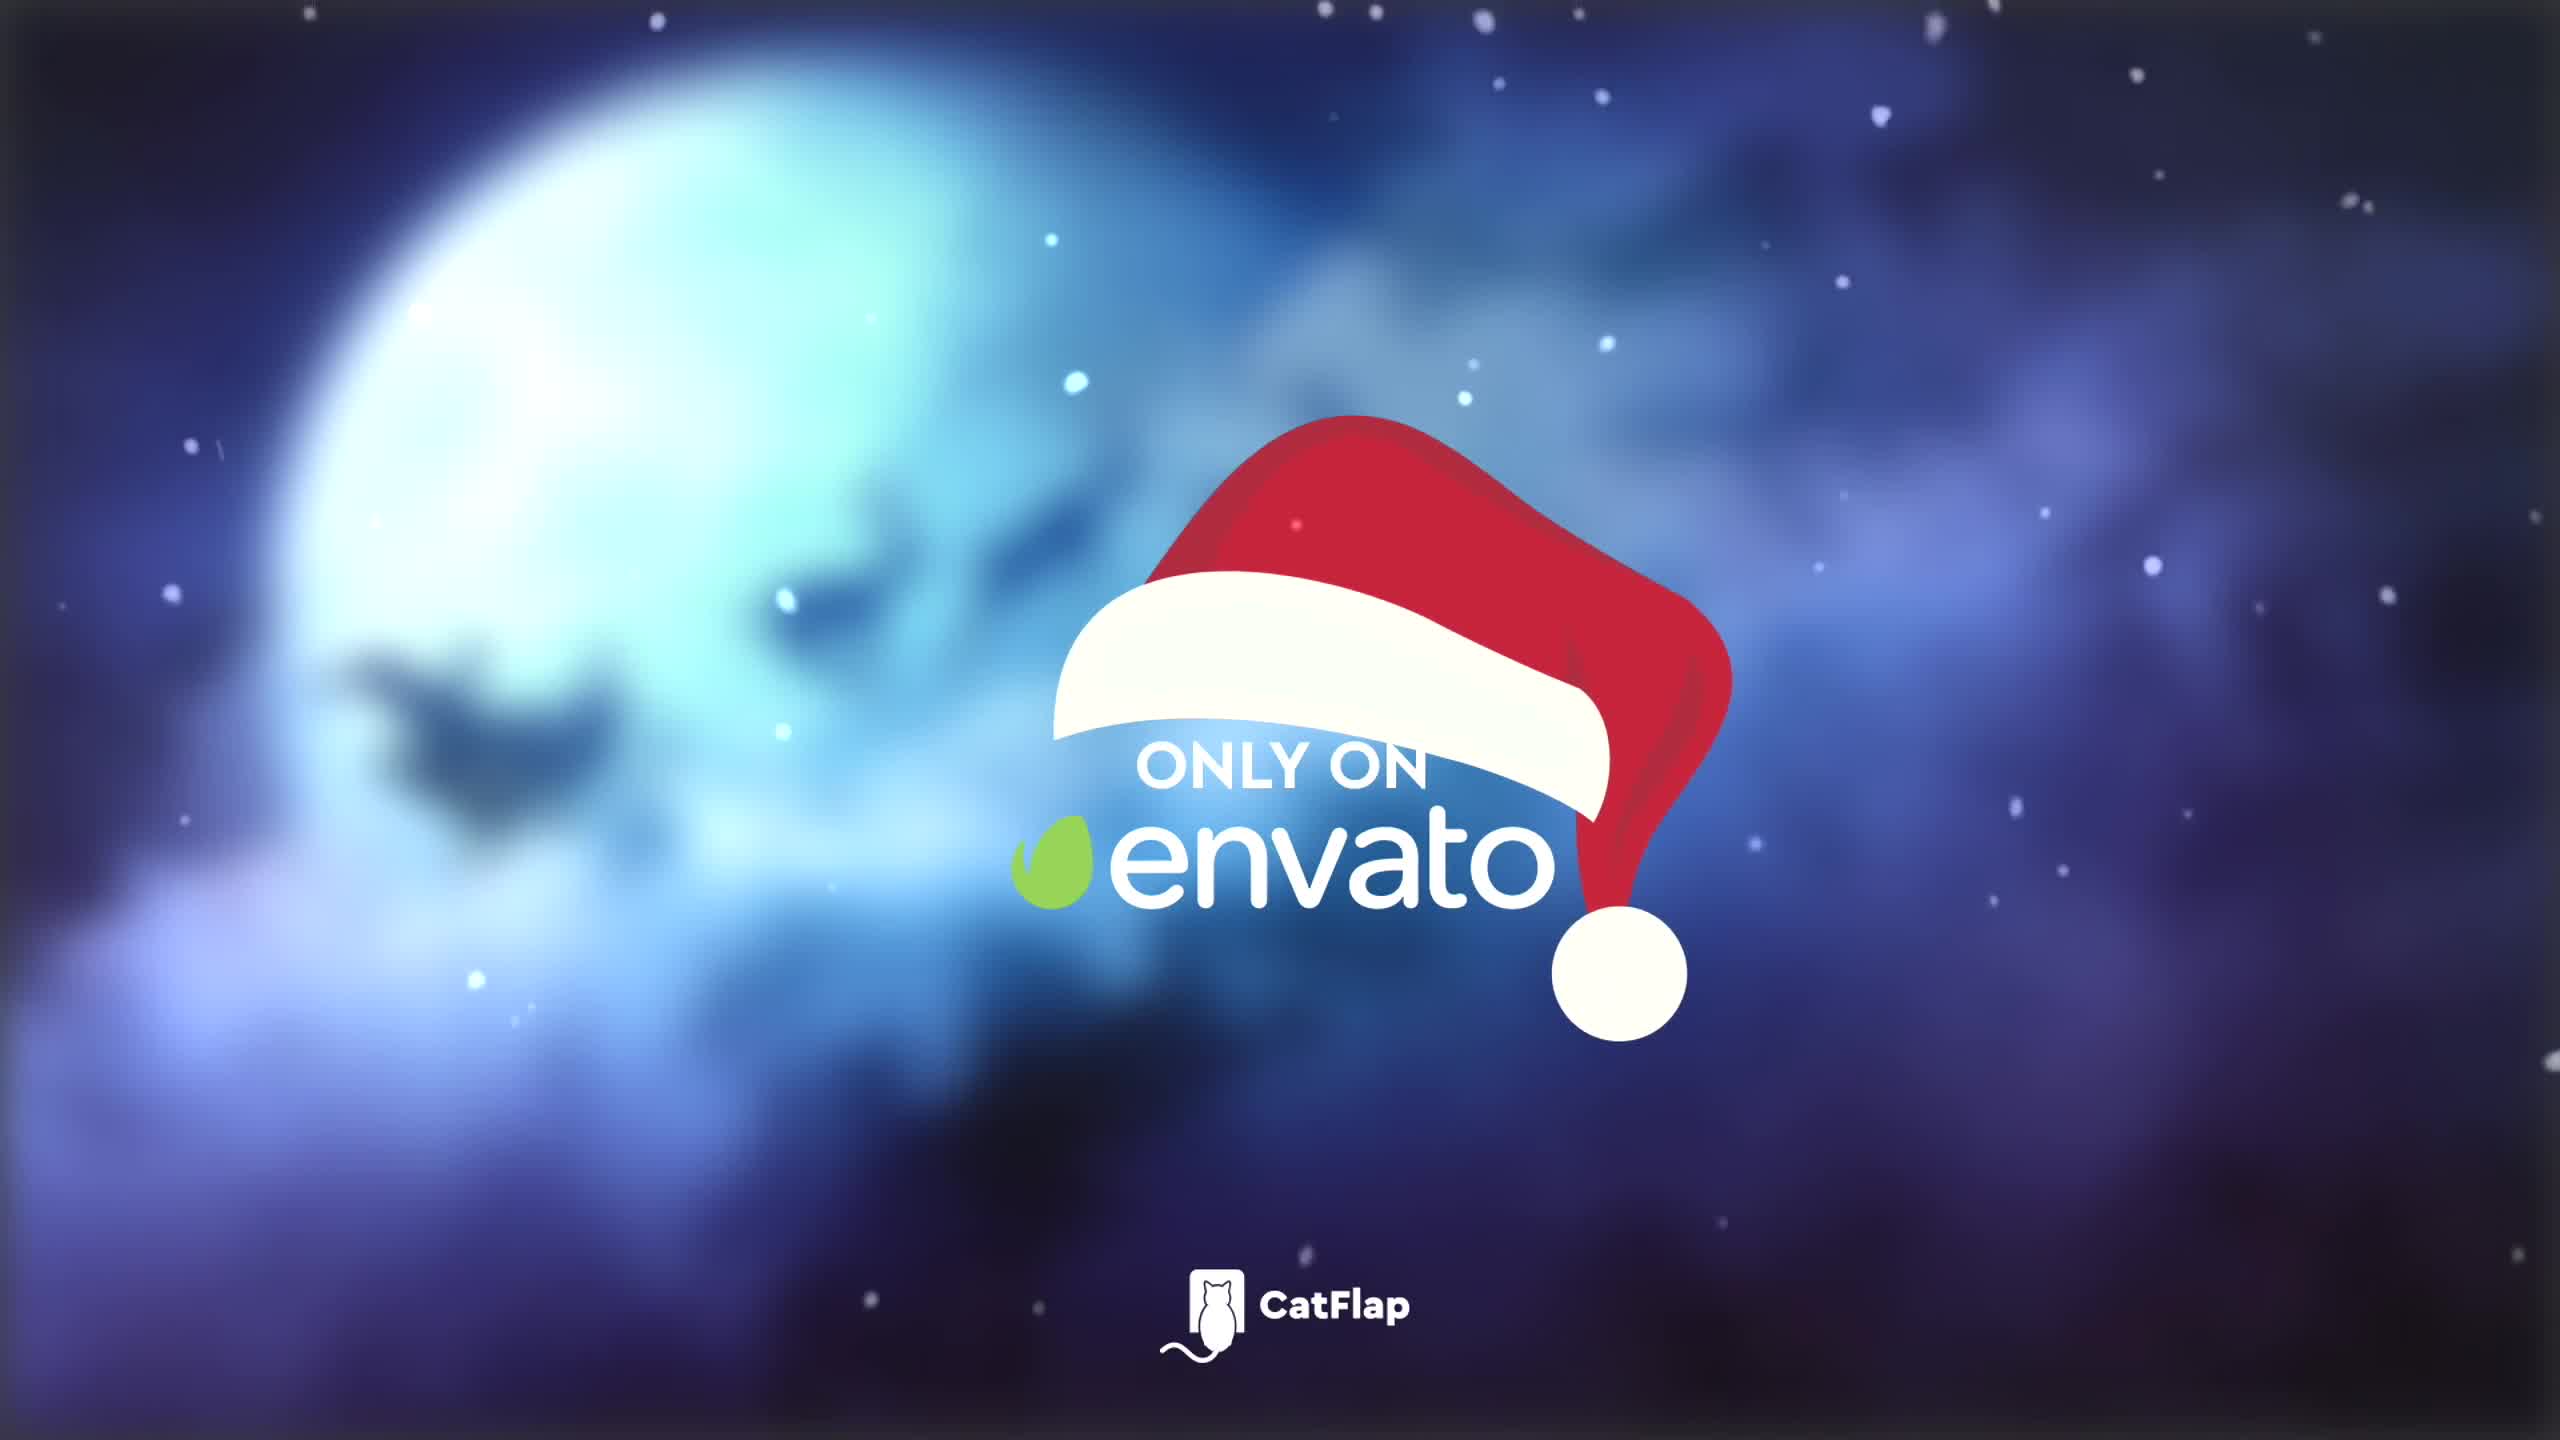 120 Animated Emojis Christmas Pack - Download Videohive 19155211